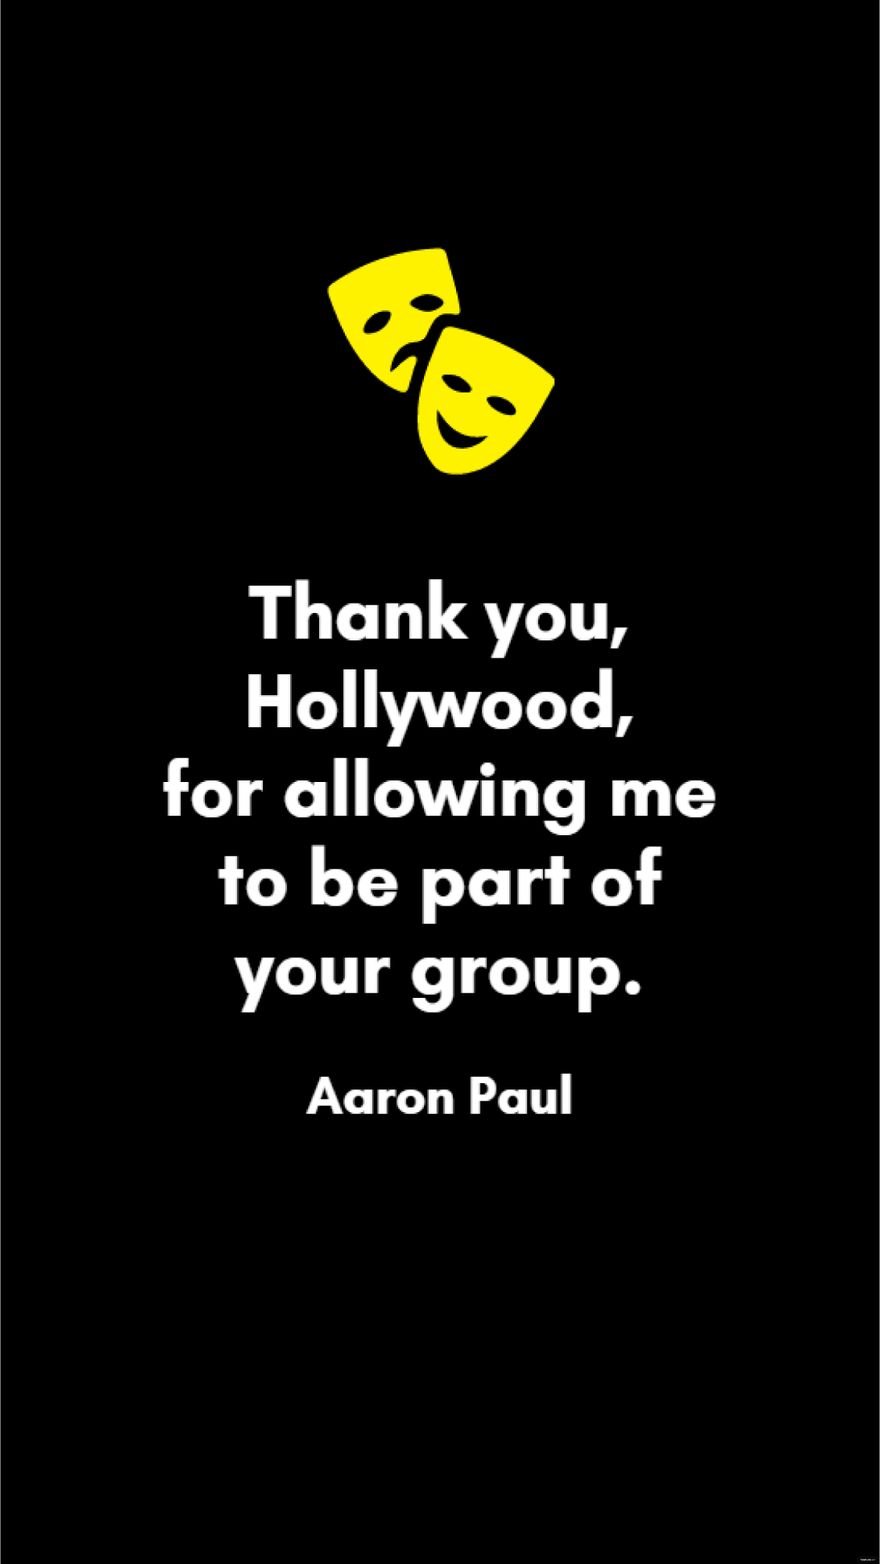 Free Aaron Paul - Thank you, Hollywood, for allowing me to be part of your group. in JPG